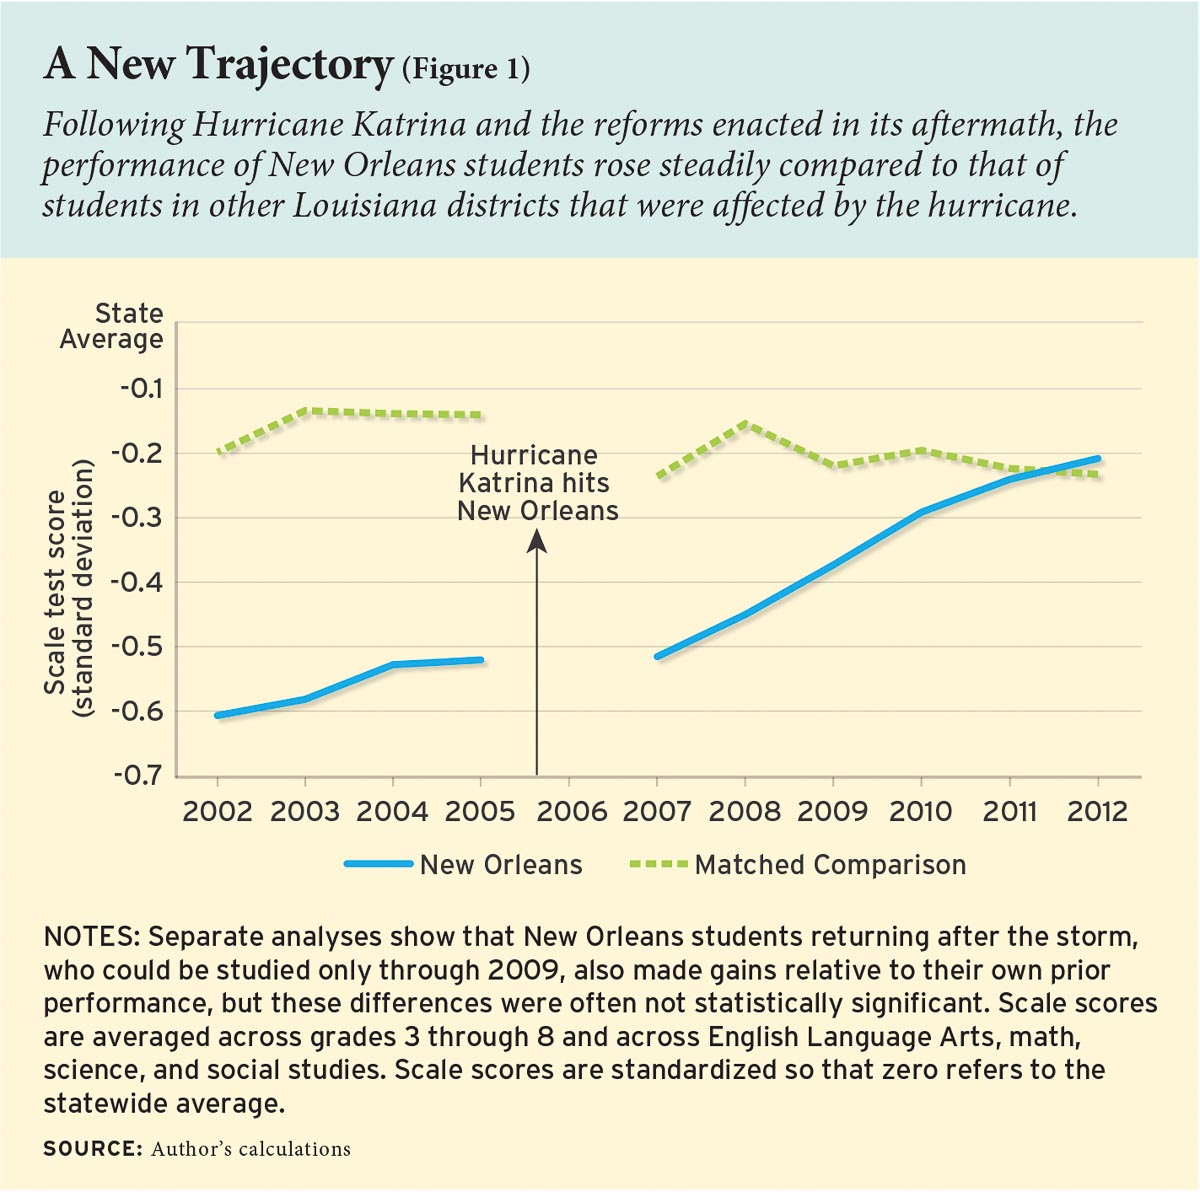 Students' performance in school after Hurricane Katrina